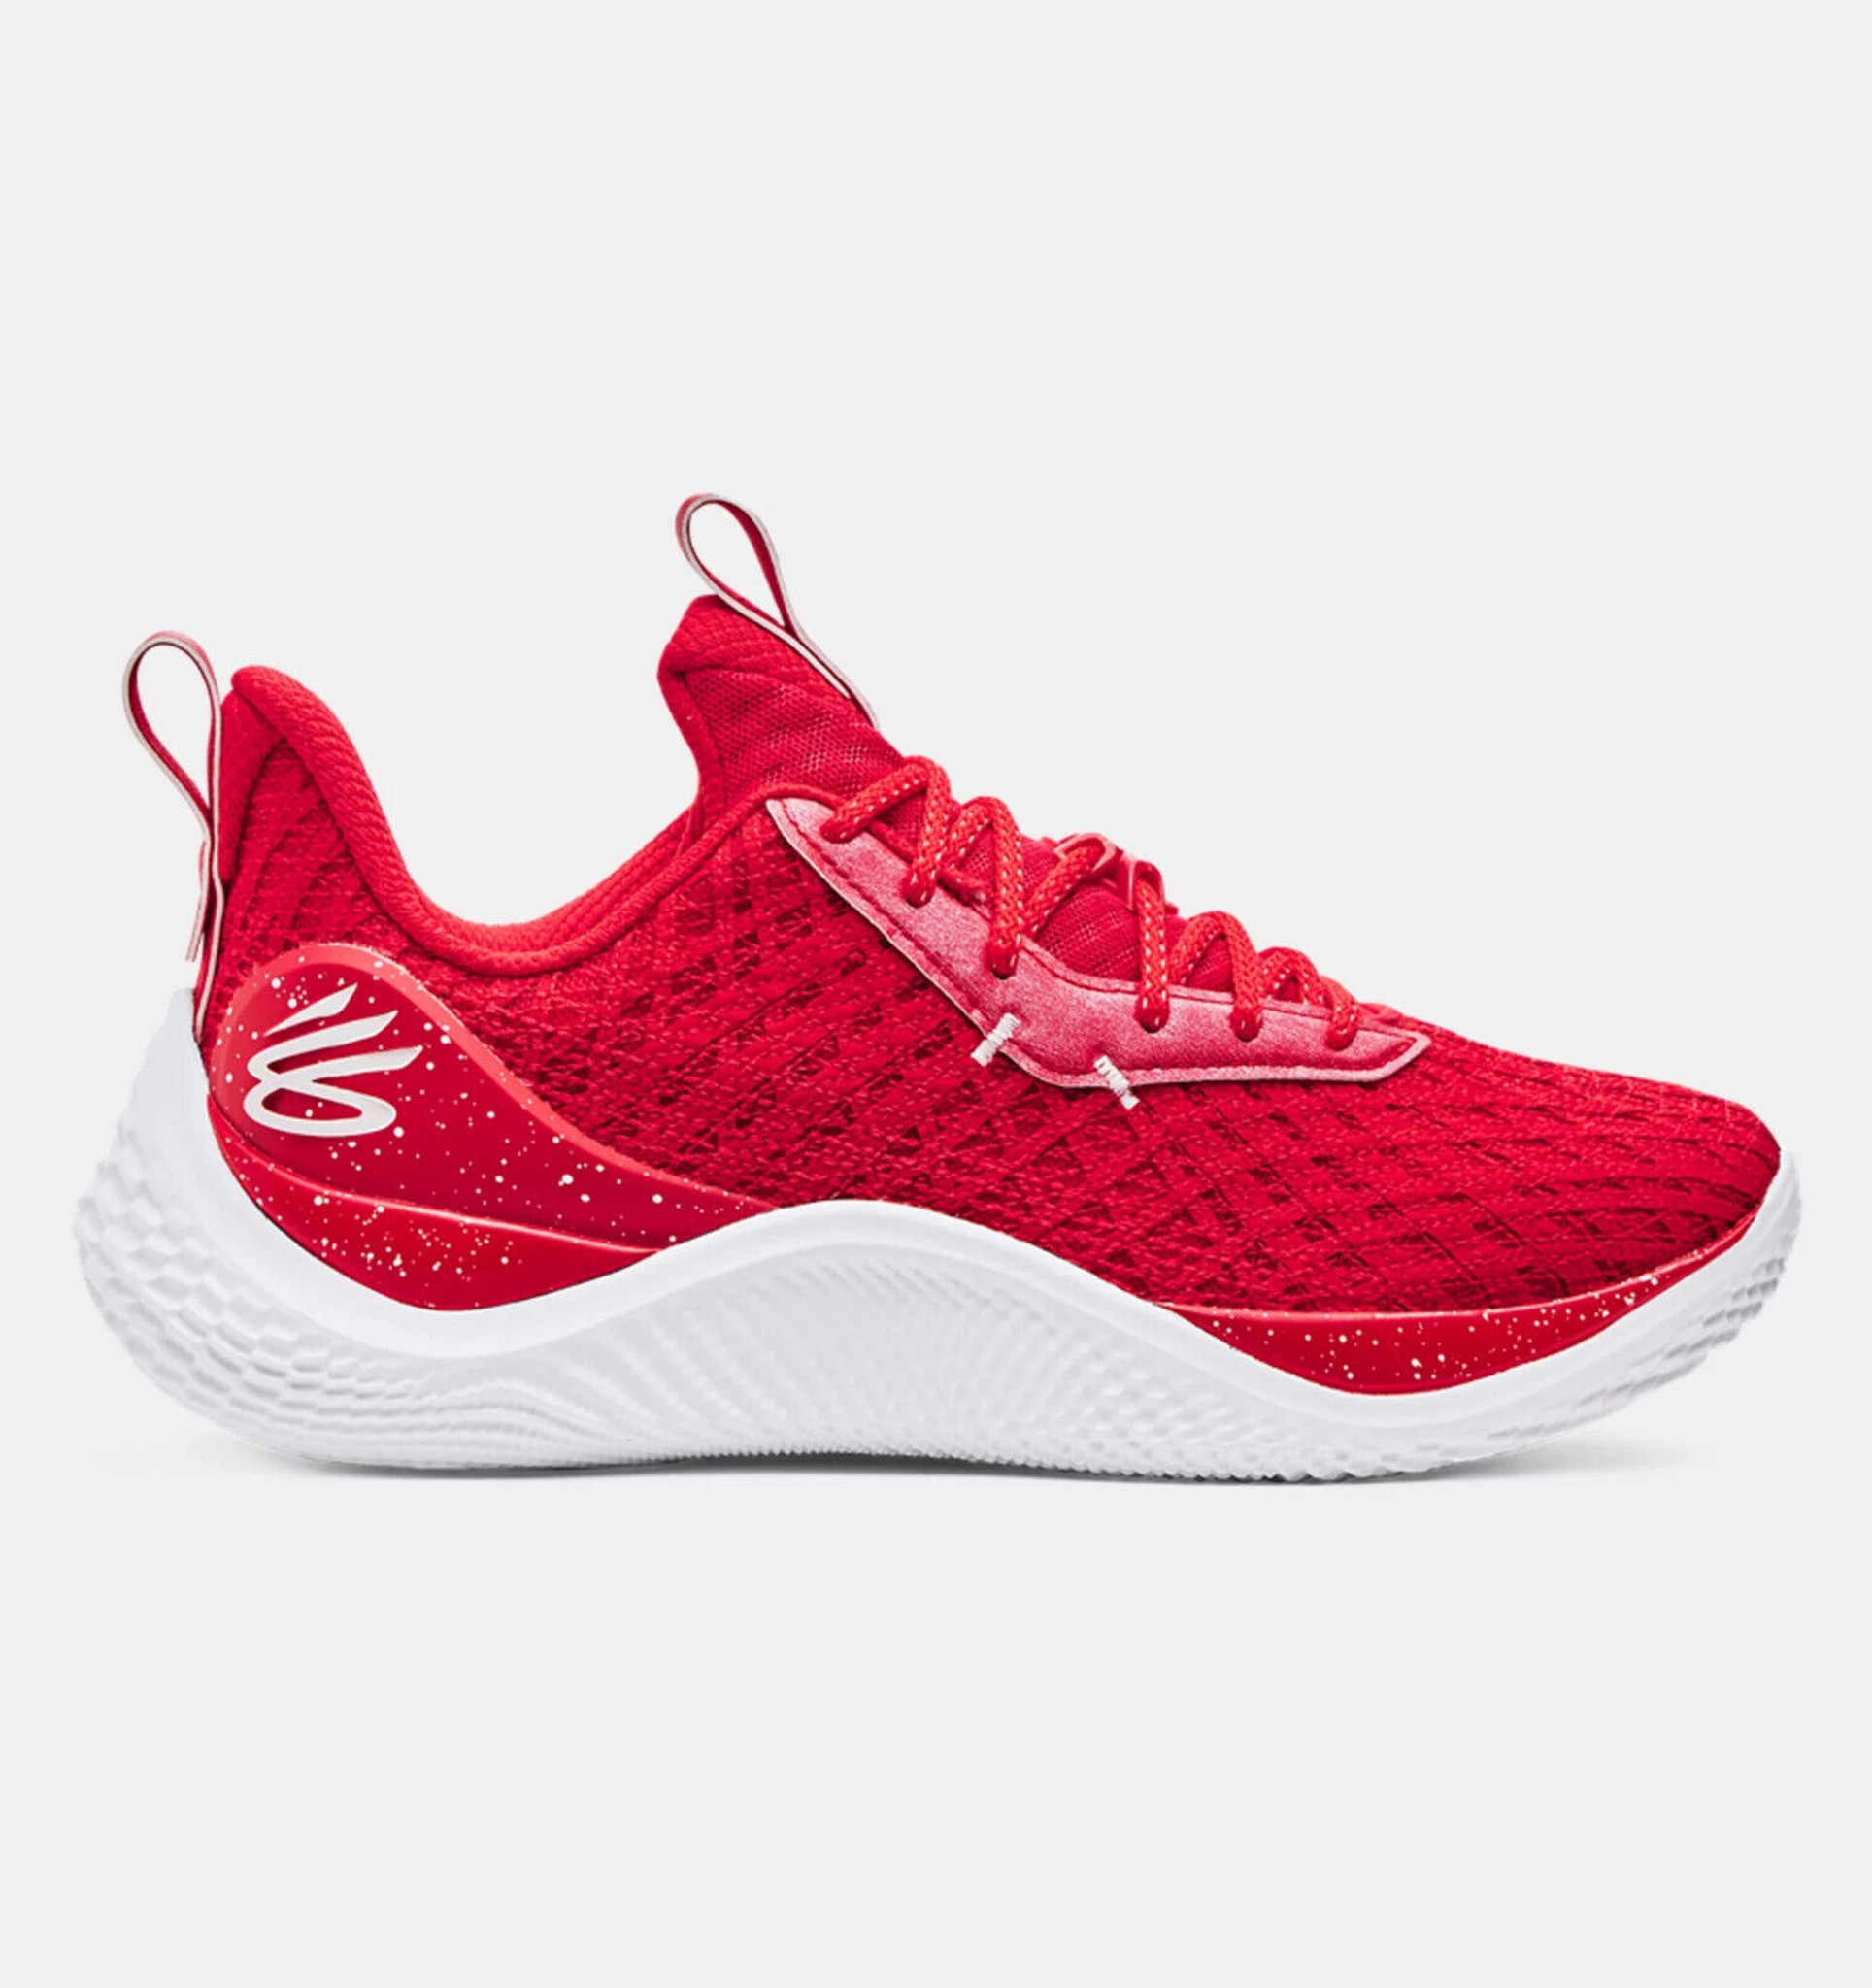 Under Armour Team Curry 10 Red Basketball Shoe